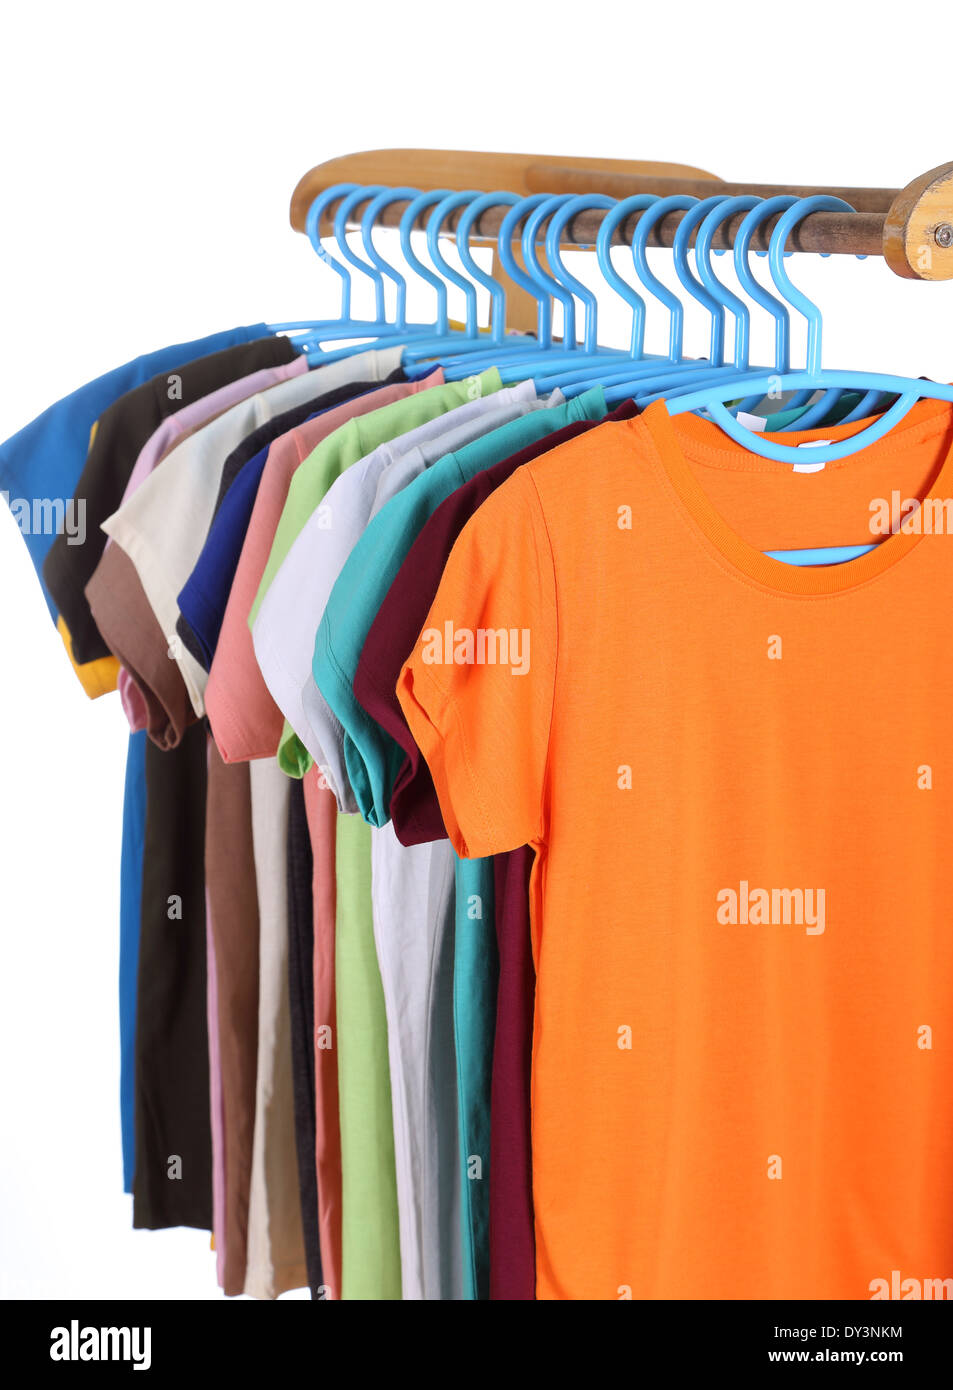 https://c8.alamy.com/comp/DY3NKM/t-shirts-hanging-on-hangers-isolated-on-white-background-DY3NKM.jpg